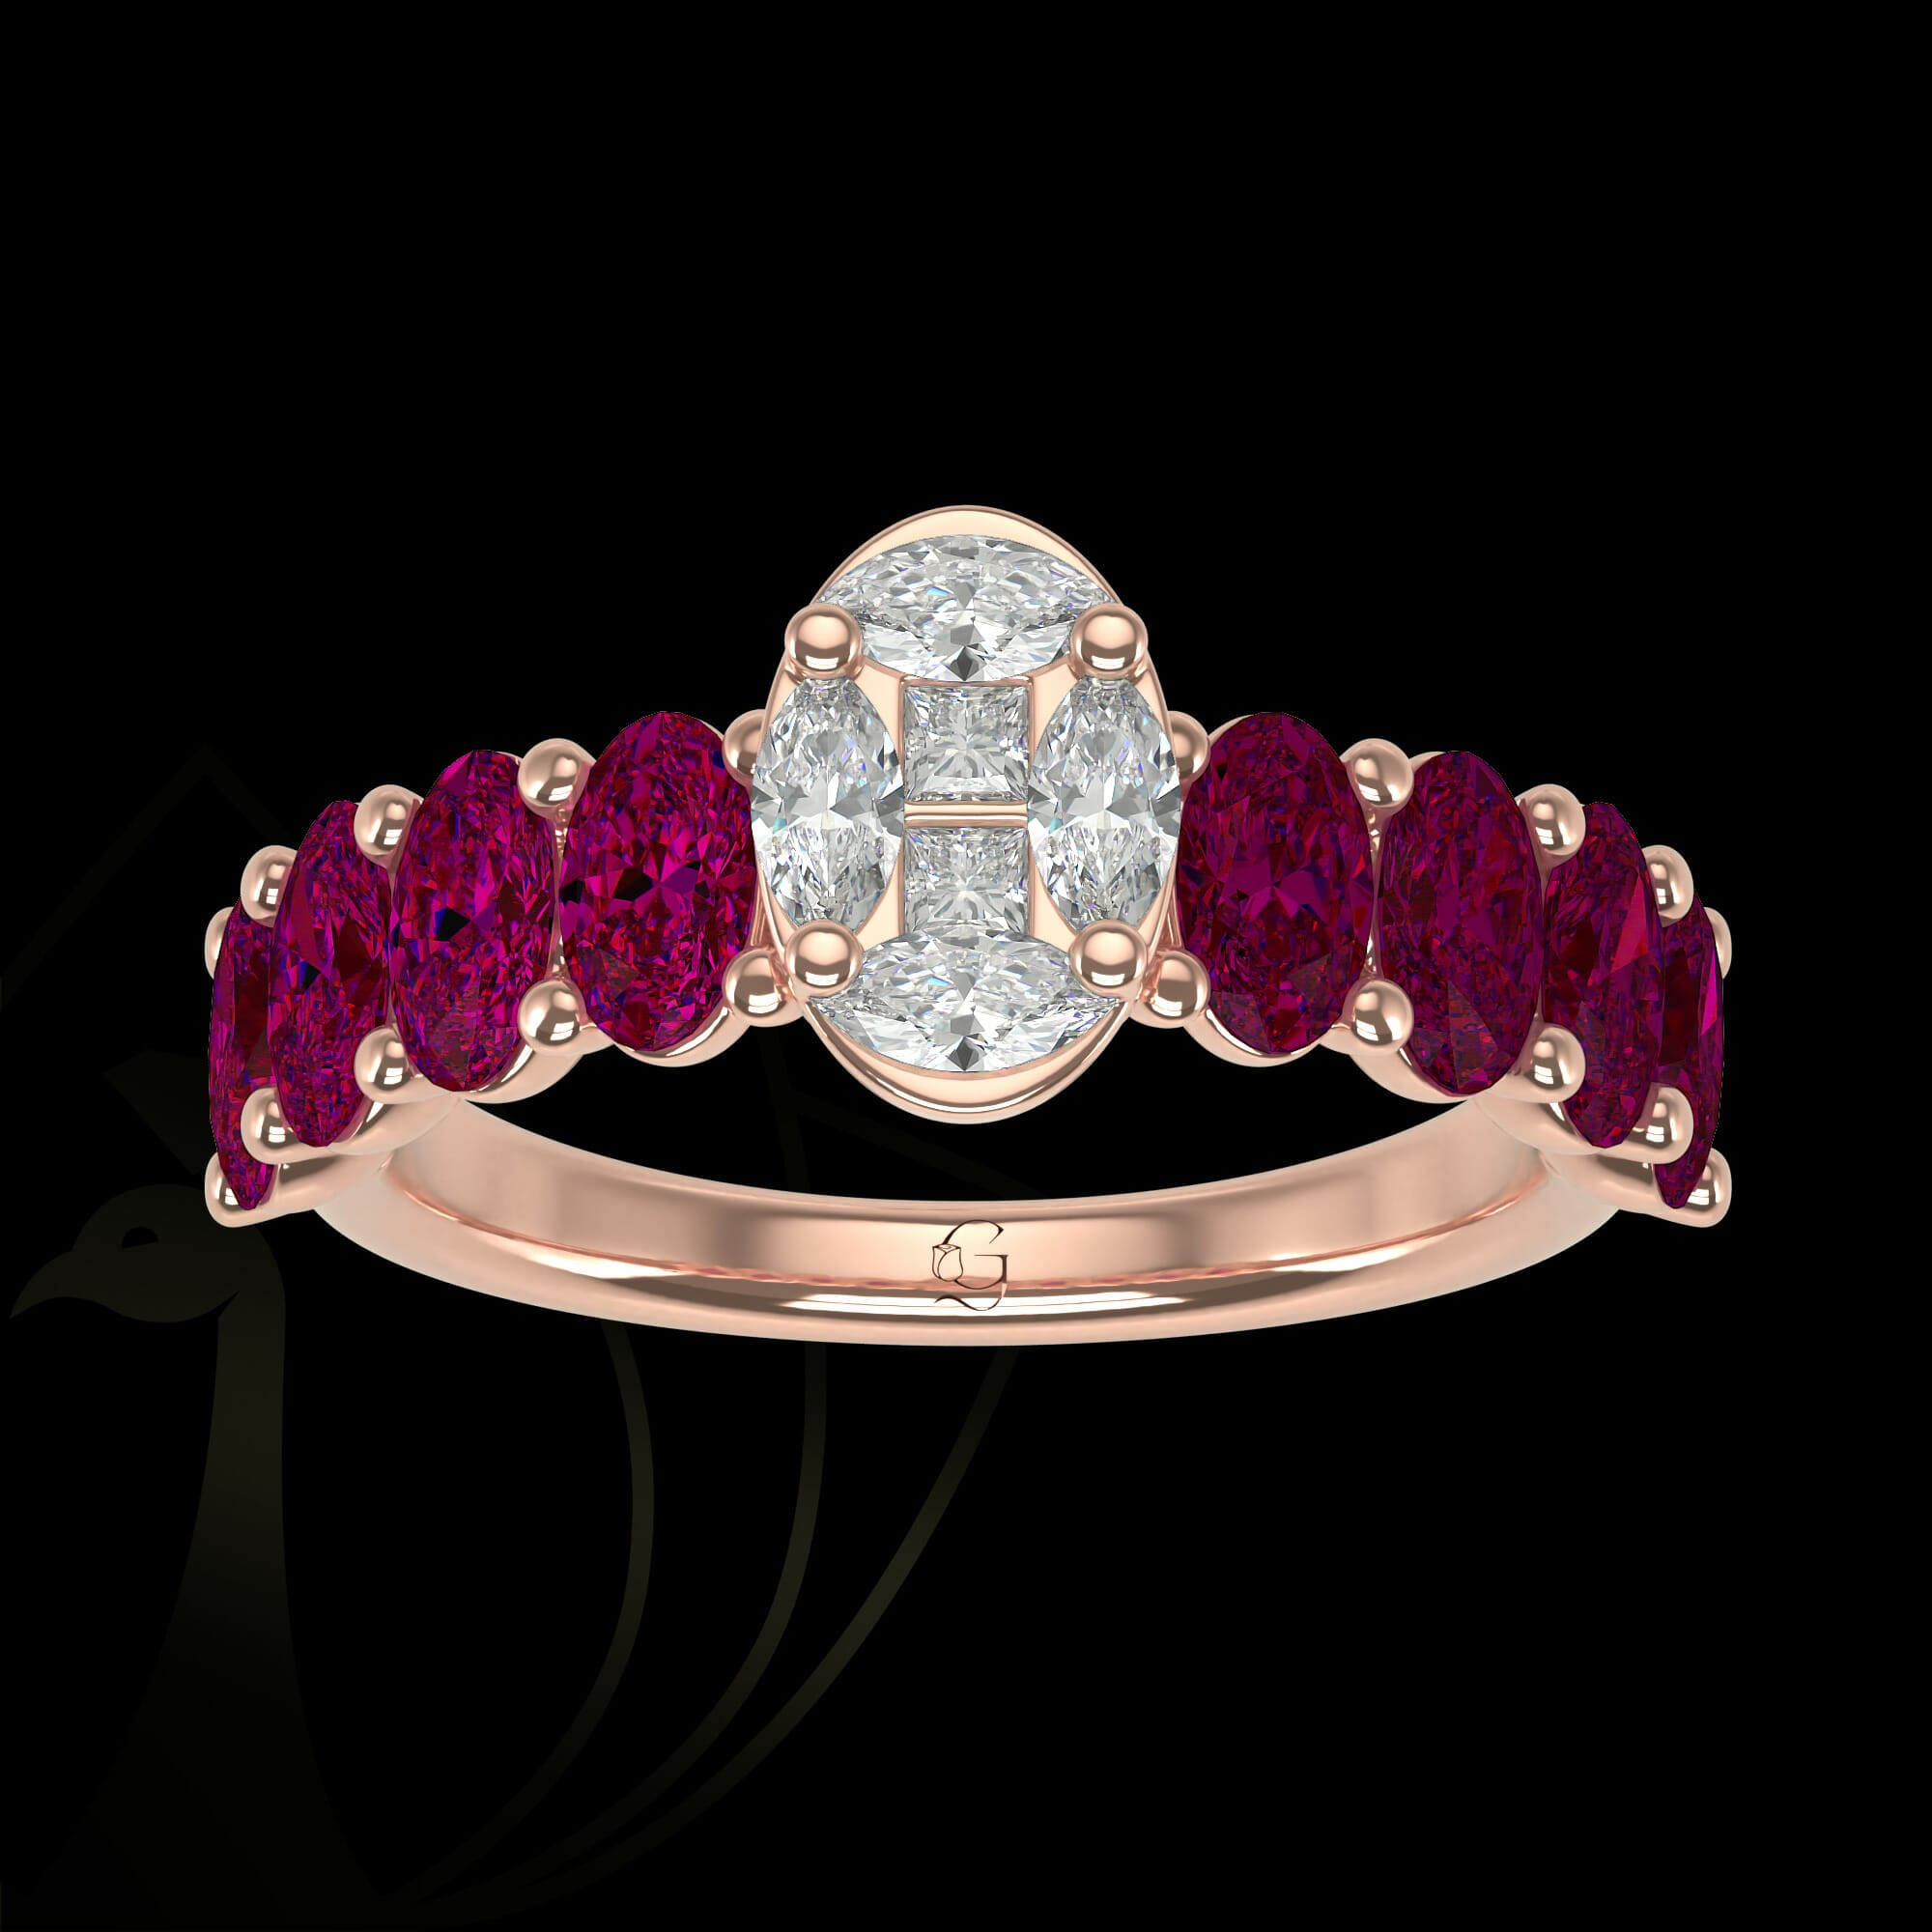 Blush Surprise Diamond Ring from our exclusive Gulz Collection